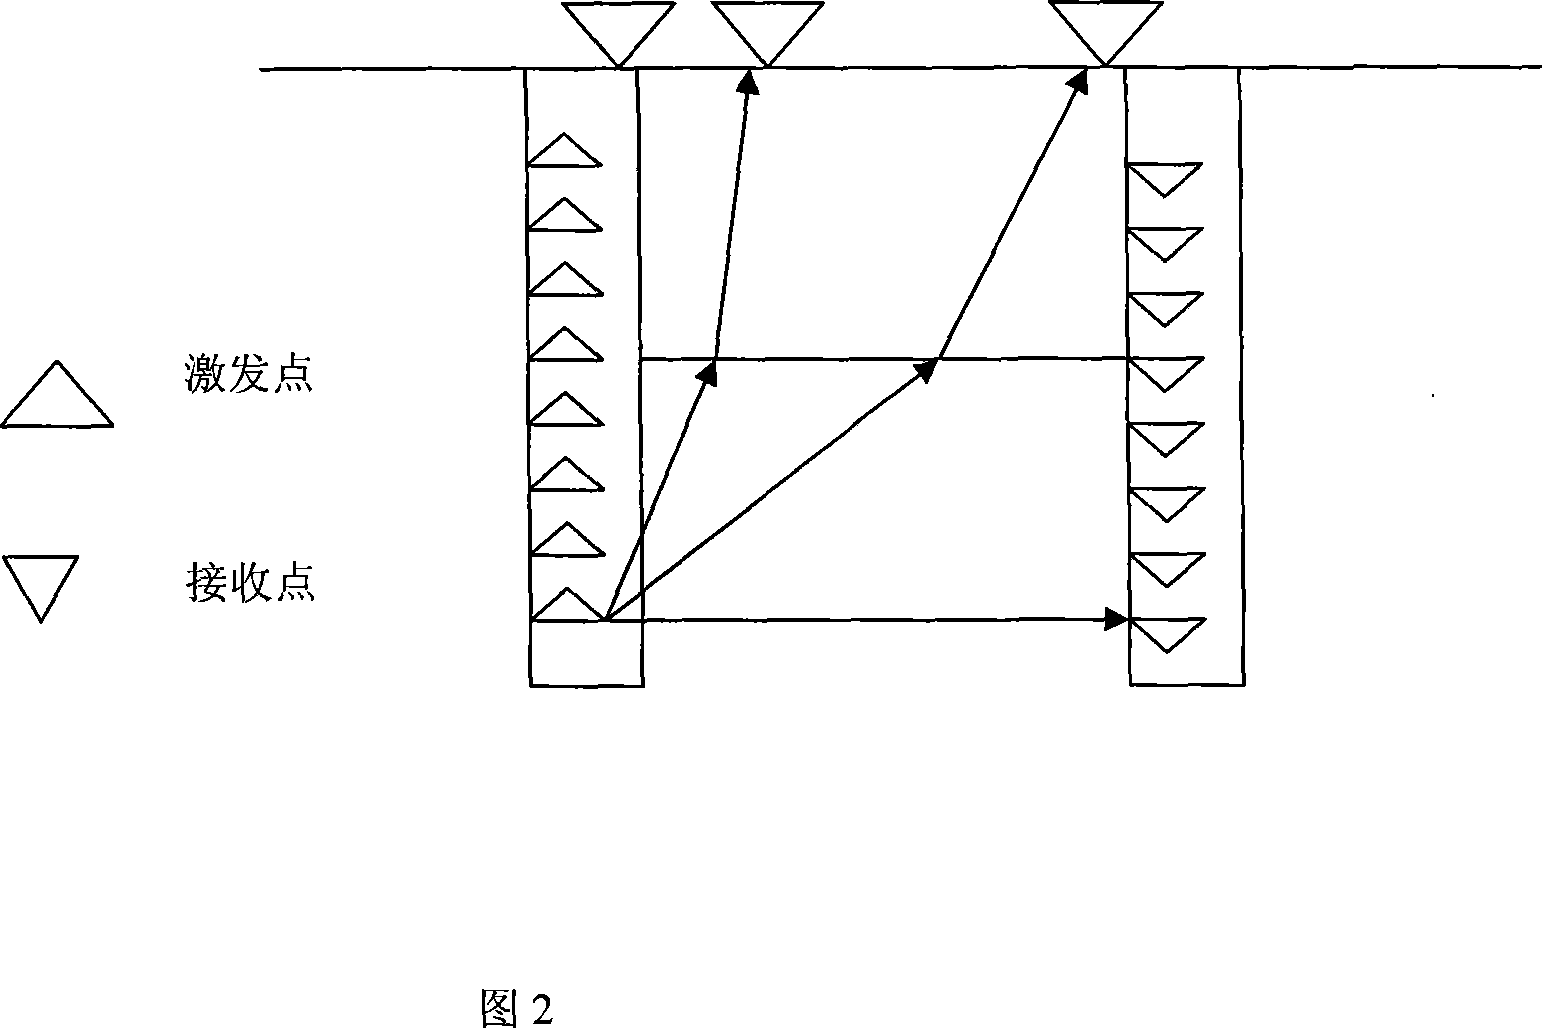 Method of raising seismic resolution with micro measuring well perpendicular to seismic profile and double well